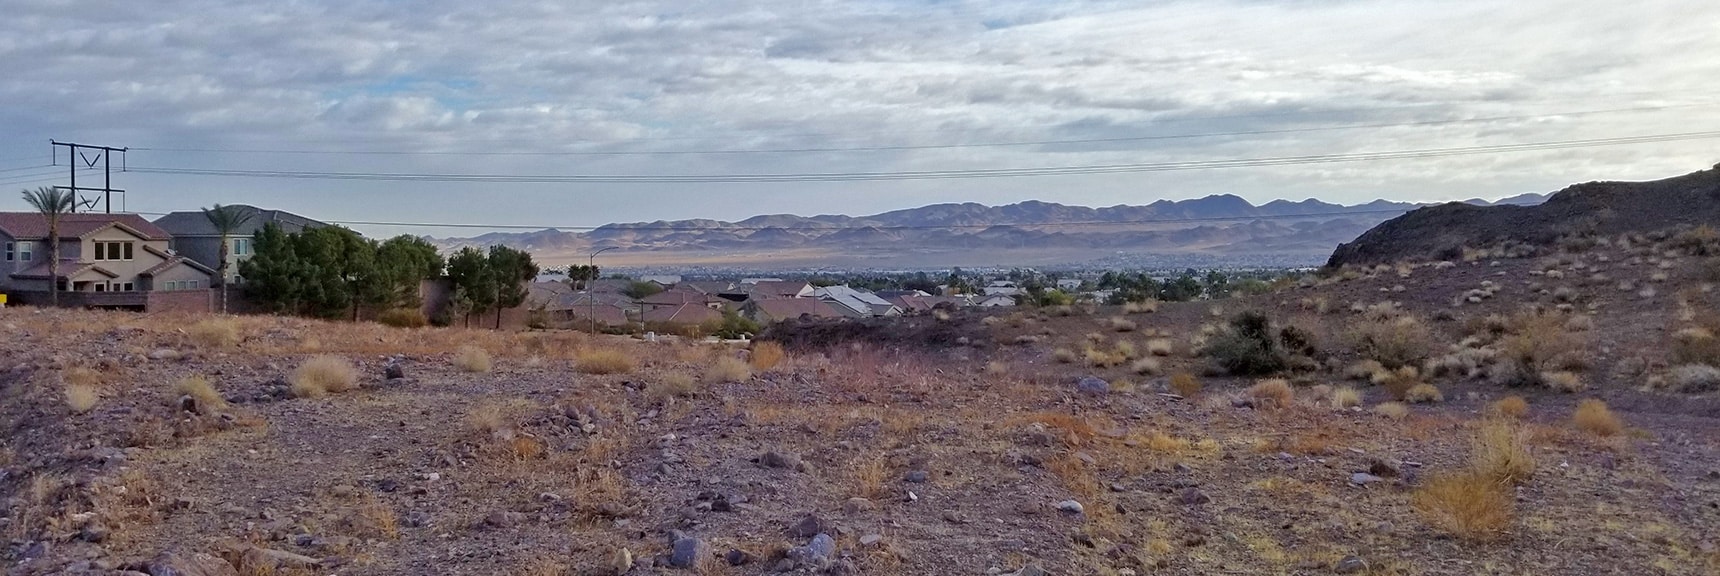 Looking Back Toward Henderson from the McCullough Hills Trailhead | McCullough Hills Trail in Sloan Canyon National Conservation Area, Nevada